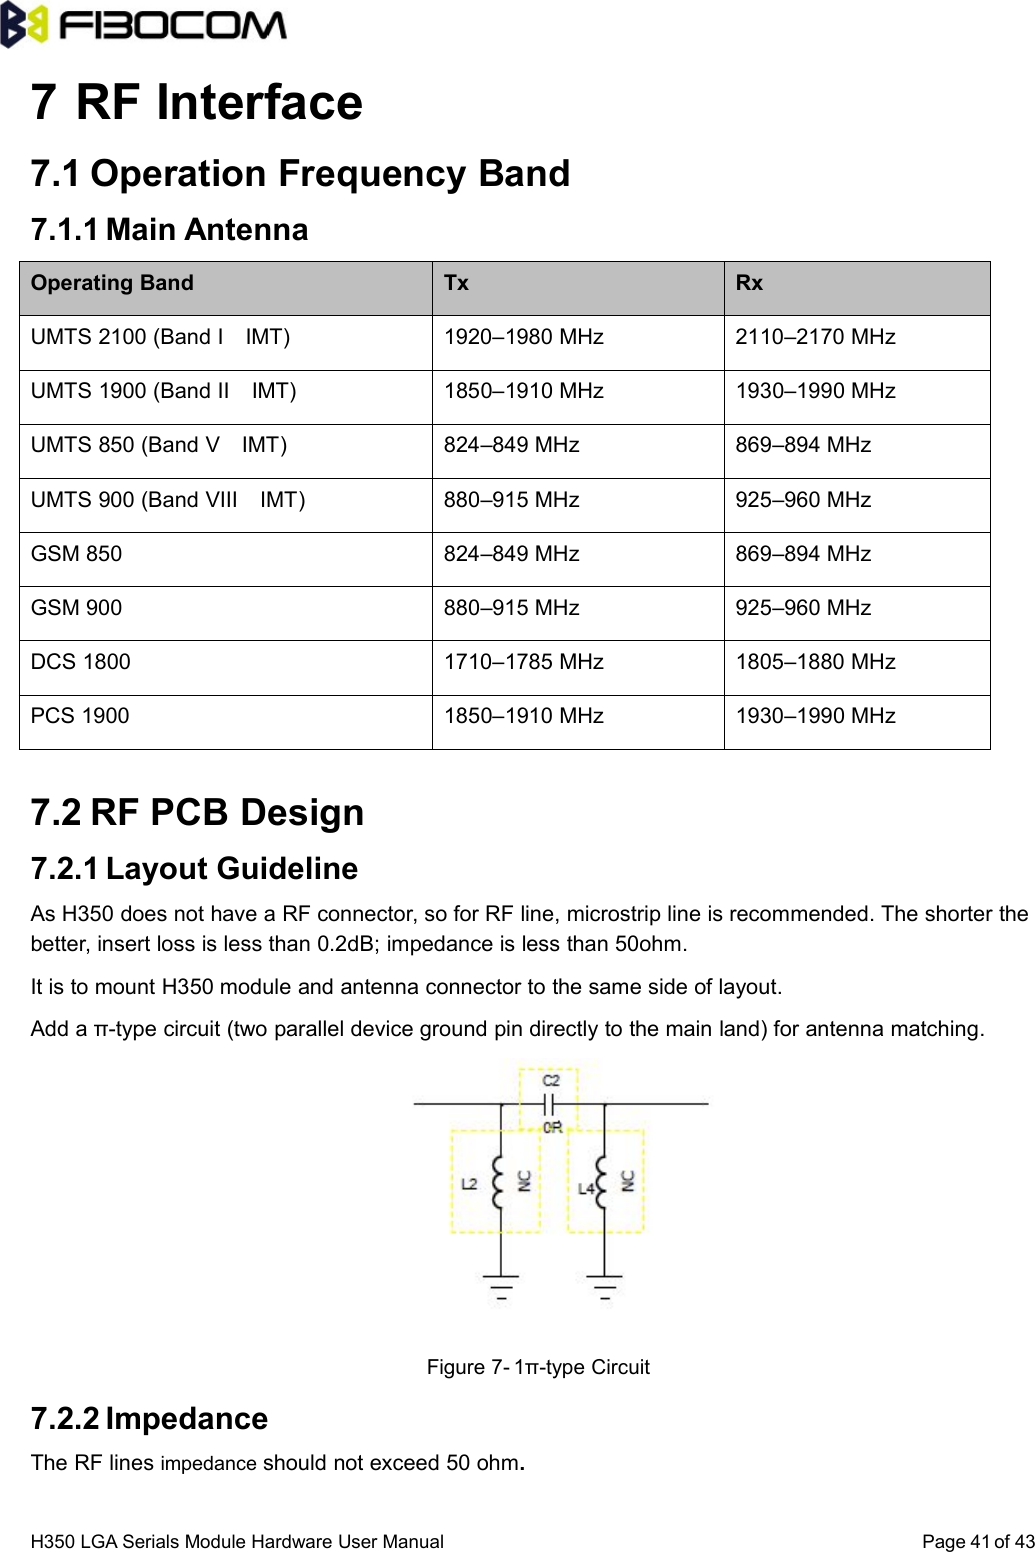 H350 LGA Serials Module Hardware User Manual Page of 43417 RF Interface7.1 Operation Frequency Band7.1.1 Main AntennaOperating Band Tx RxUMTS 2100 (Band I IMT) 1920–1980 MHz 2110–2170 MHzUMTS 1900 (Band II IMT) 1850–1910 MHz 1930–1990 MHzUMTS 850 (Band V IMT) 824–849 MHz 869–894 MHzUMTS 900 (Band VIII IMT) 880–915 MHz 925–960 MHzGSM 850 824–849 MHz 869–894 MHzGSM 900 880–915 MHz 925–960 MHzDCS 1800 1710–1785 MHz 1805–1880 MHzPCS 1900 1850–1910 MHz 1930–1990 MHz7.2 RF PCB Design7.2.1 Layout GuidelineAs H350 does not have a RF connector, so for RF line, microstrip line is recommended. The shorter thebetter, insert loss is less than 0.2dB; impedance is less than 50ohm.It is to mount H350 module and antenna connector to the same side of layout.Add a π-type circuit (two parallel device ground pin directly to the main land) for antenna matching.Figure 7- 1π-type Circuit7.2.2 ImpedanceThe RF lines impedance should not exceed 50 ohm.